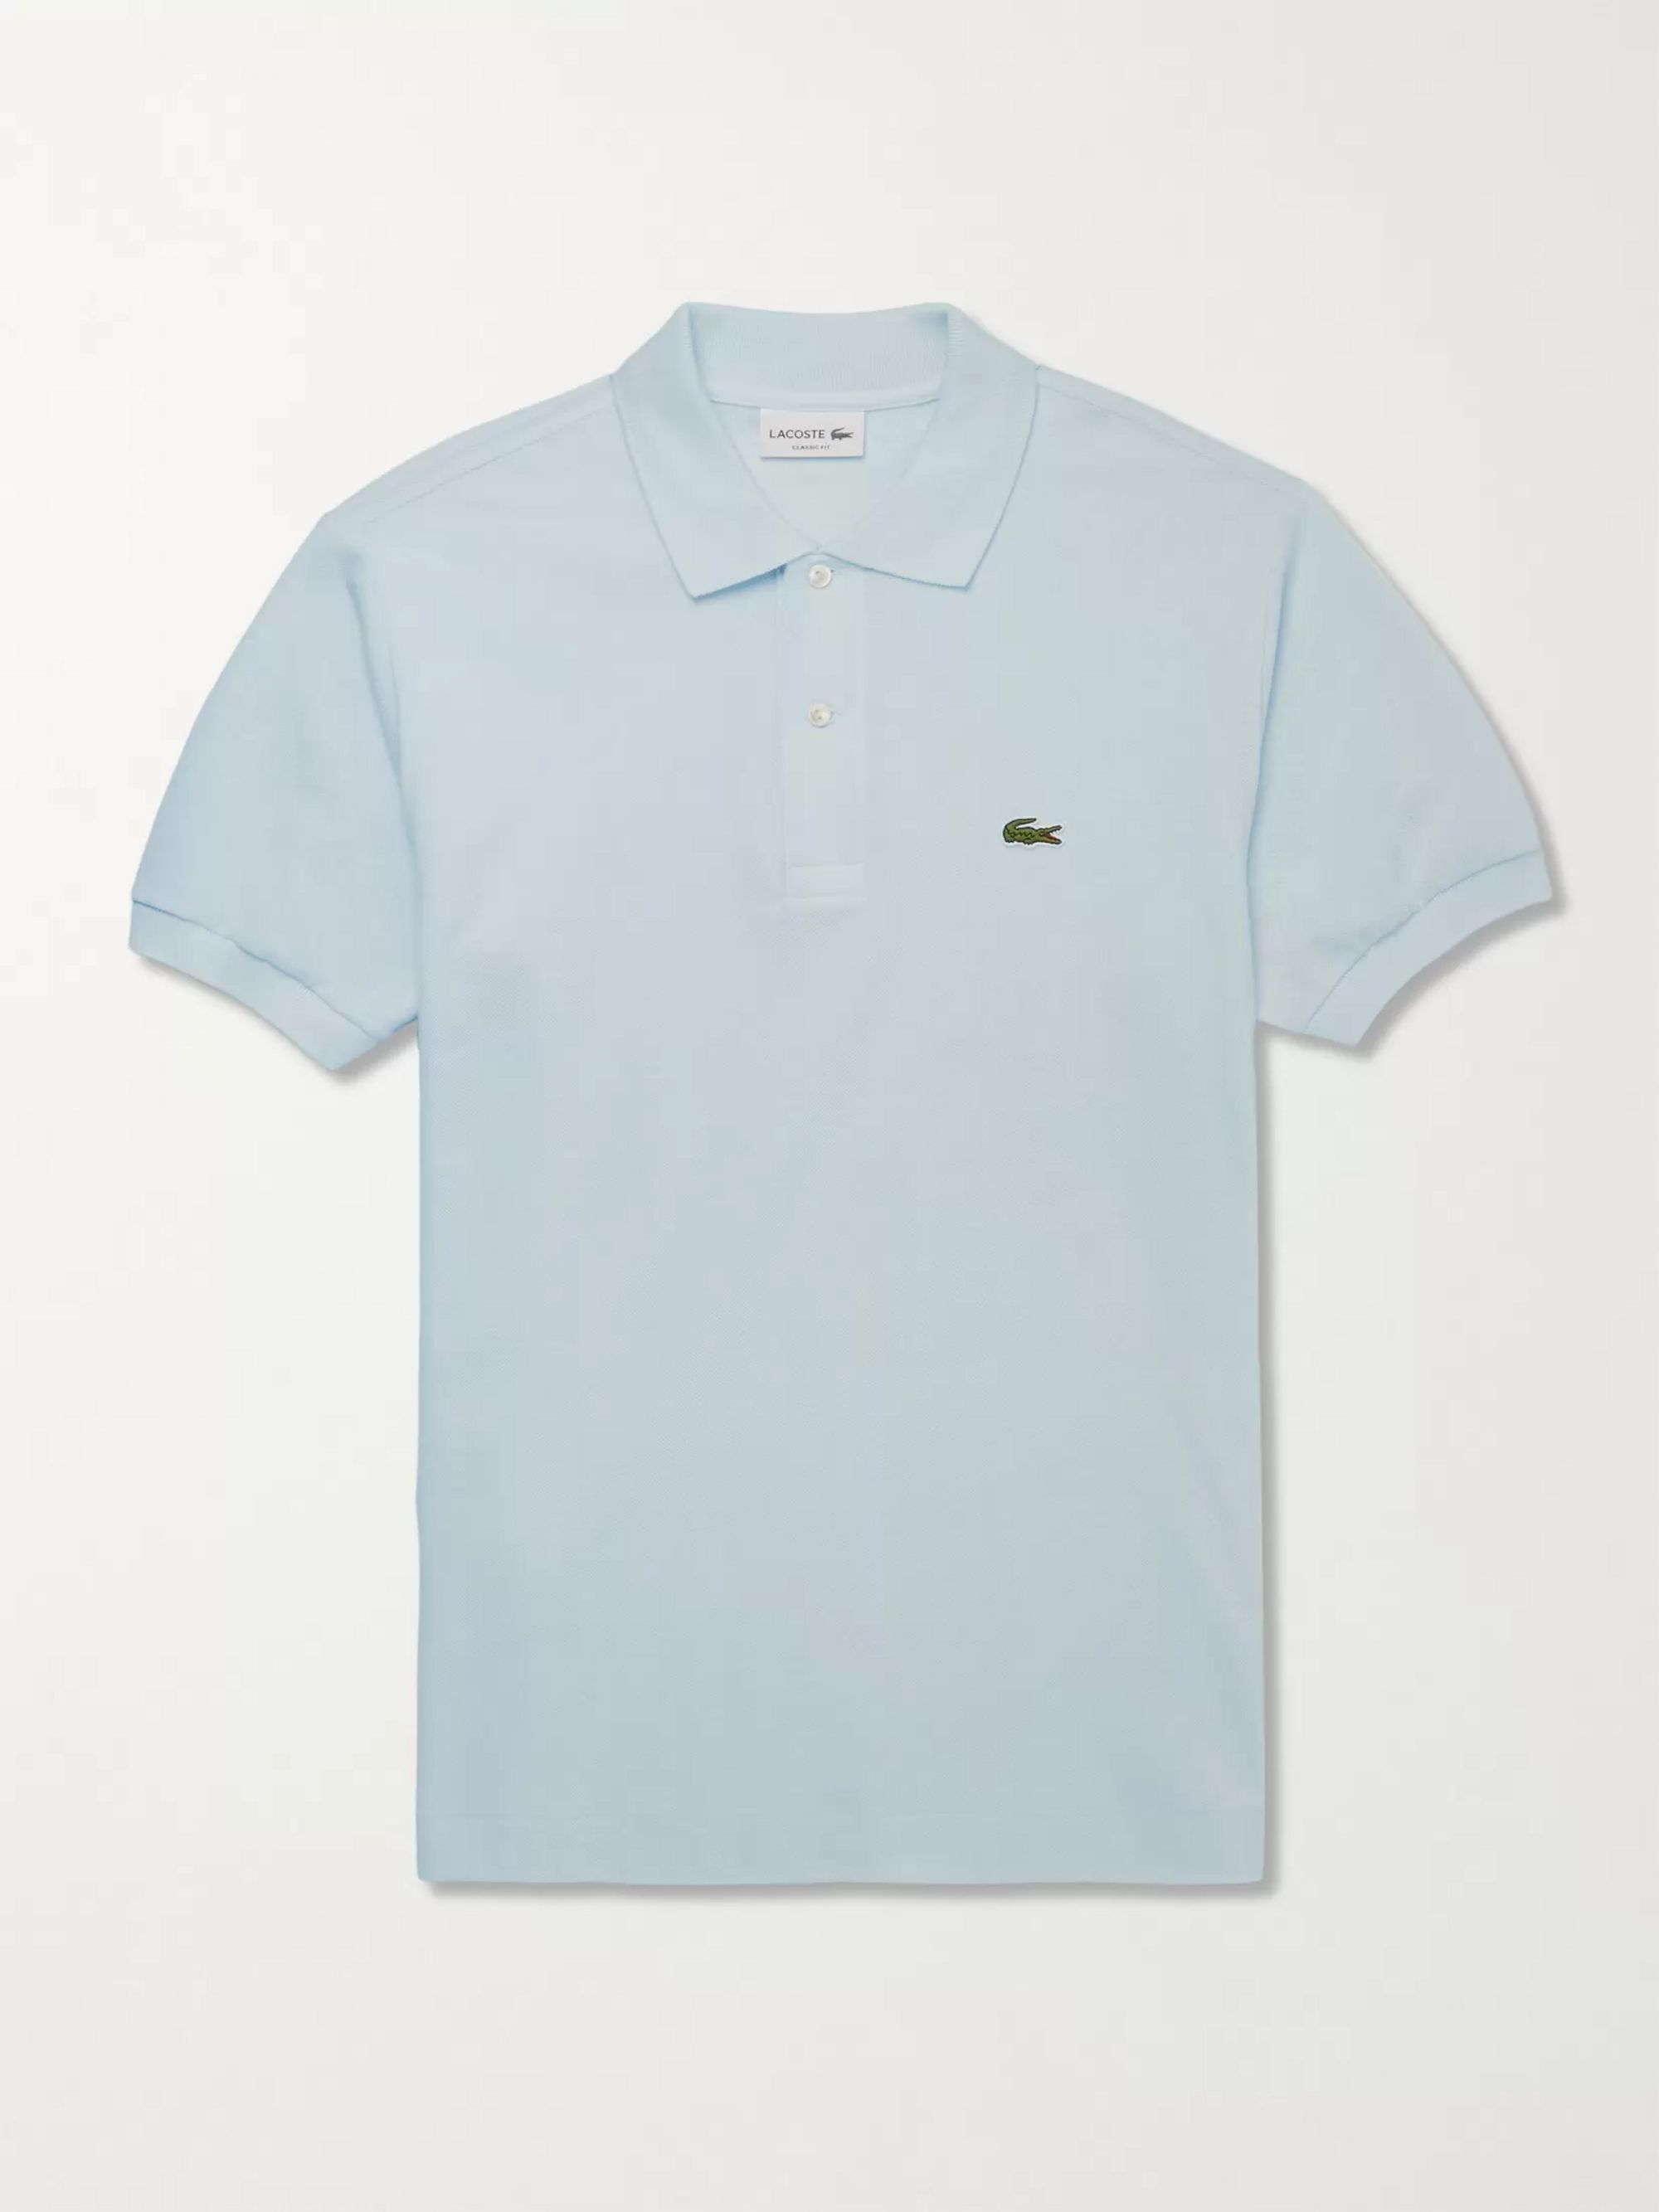 andre lacoste tennis